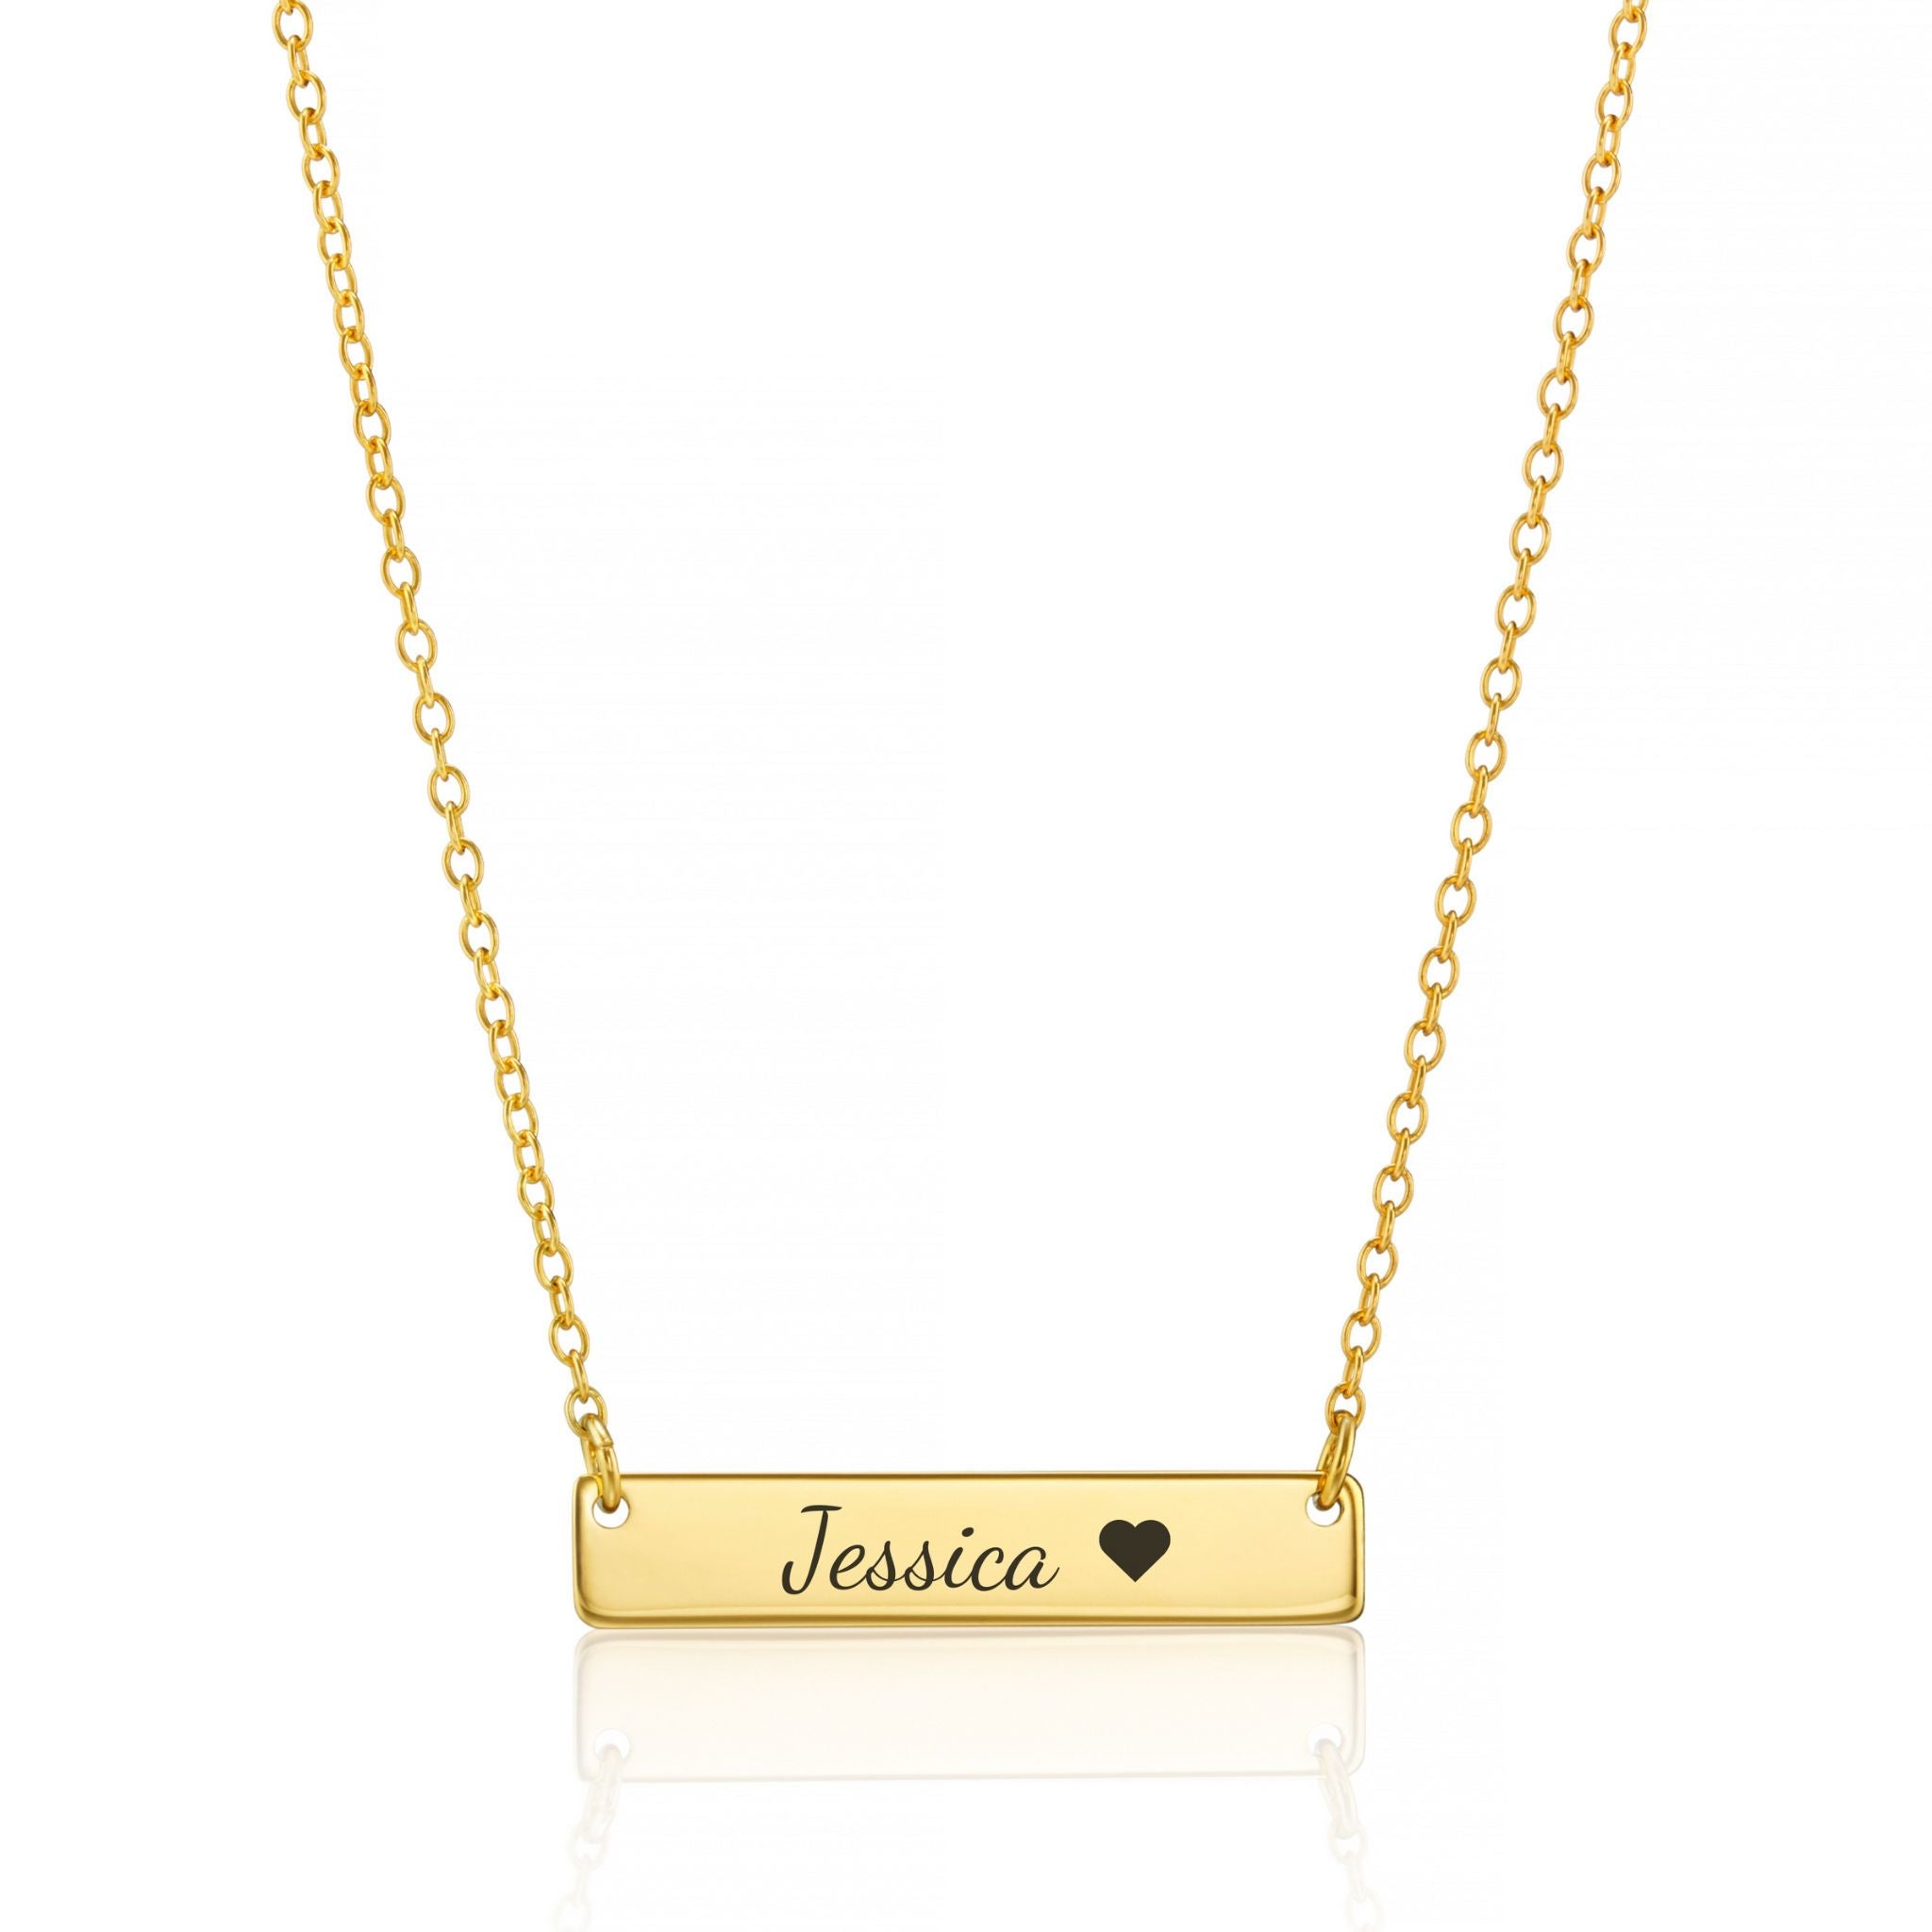 Personalised Dainty Name Tag Necklace